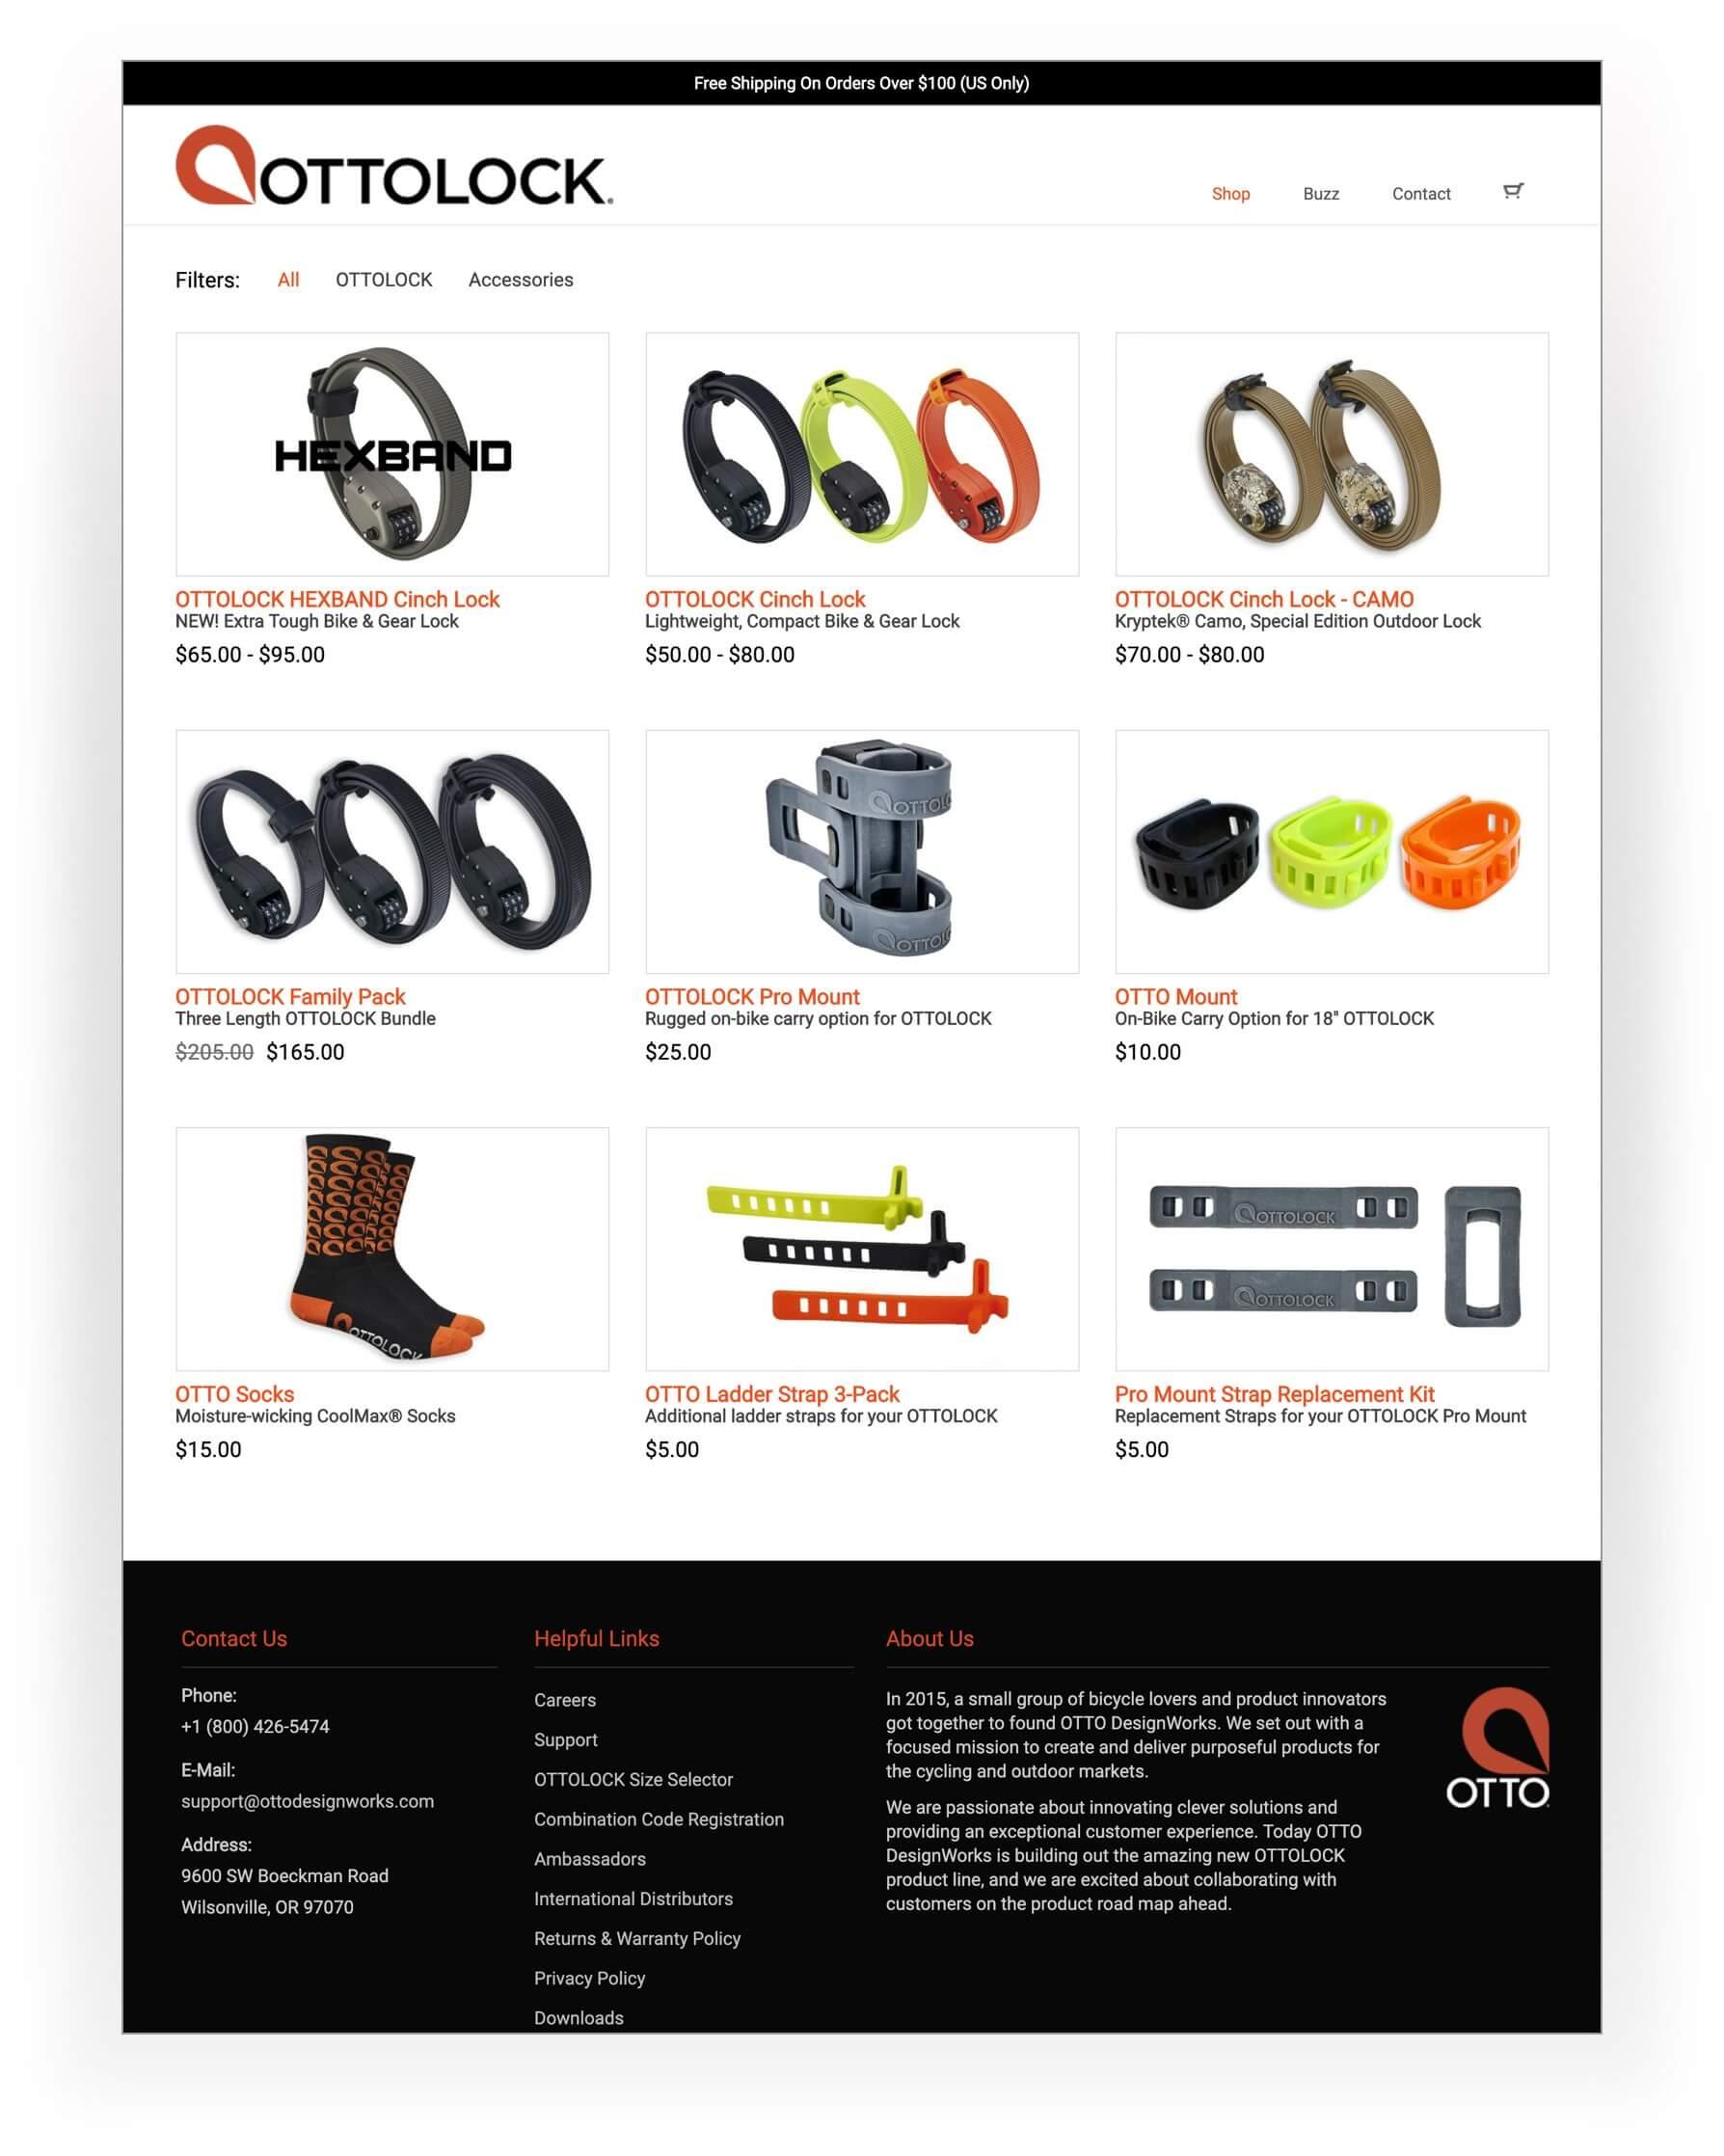 An image showing the catalog page of the OTTOLock website